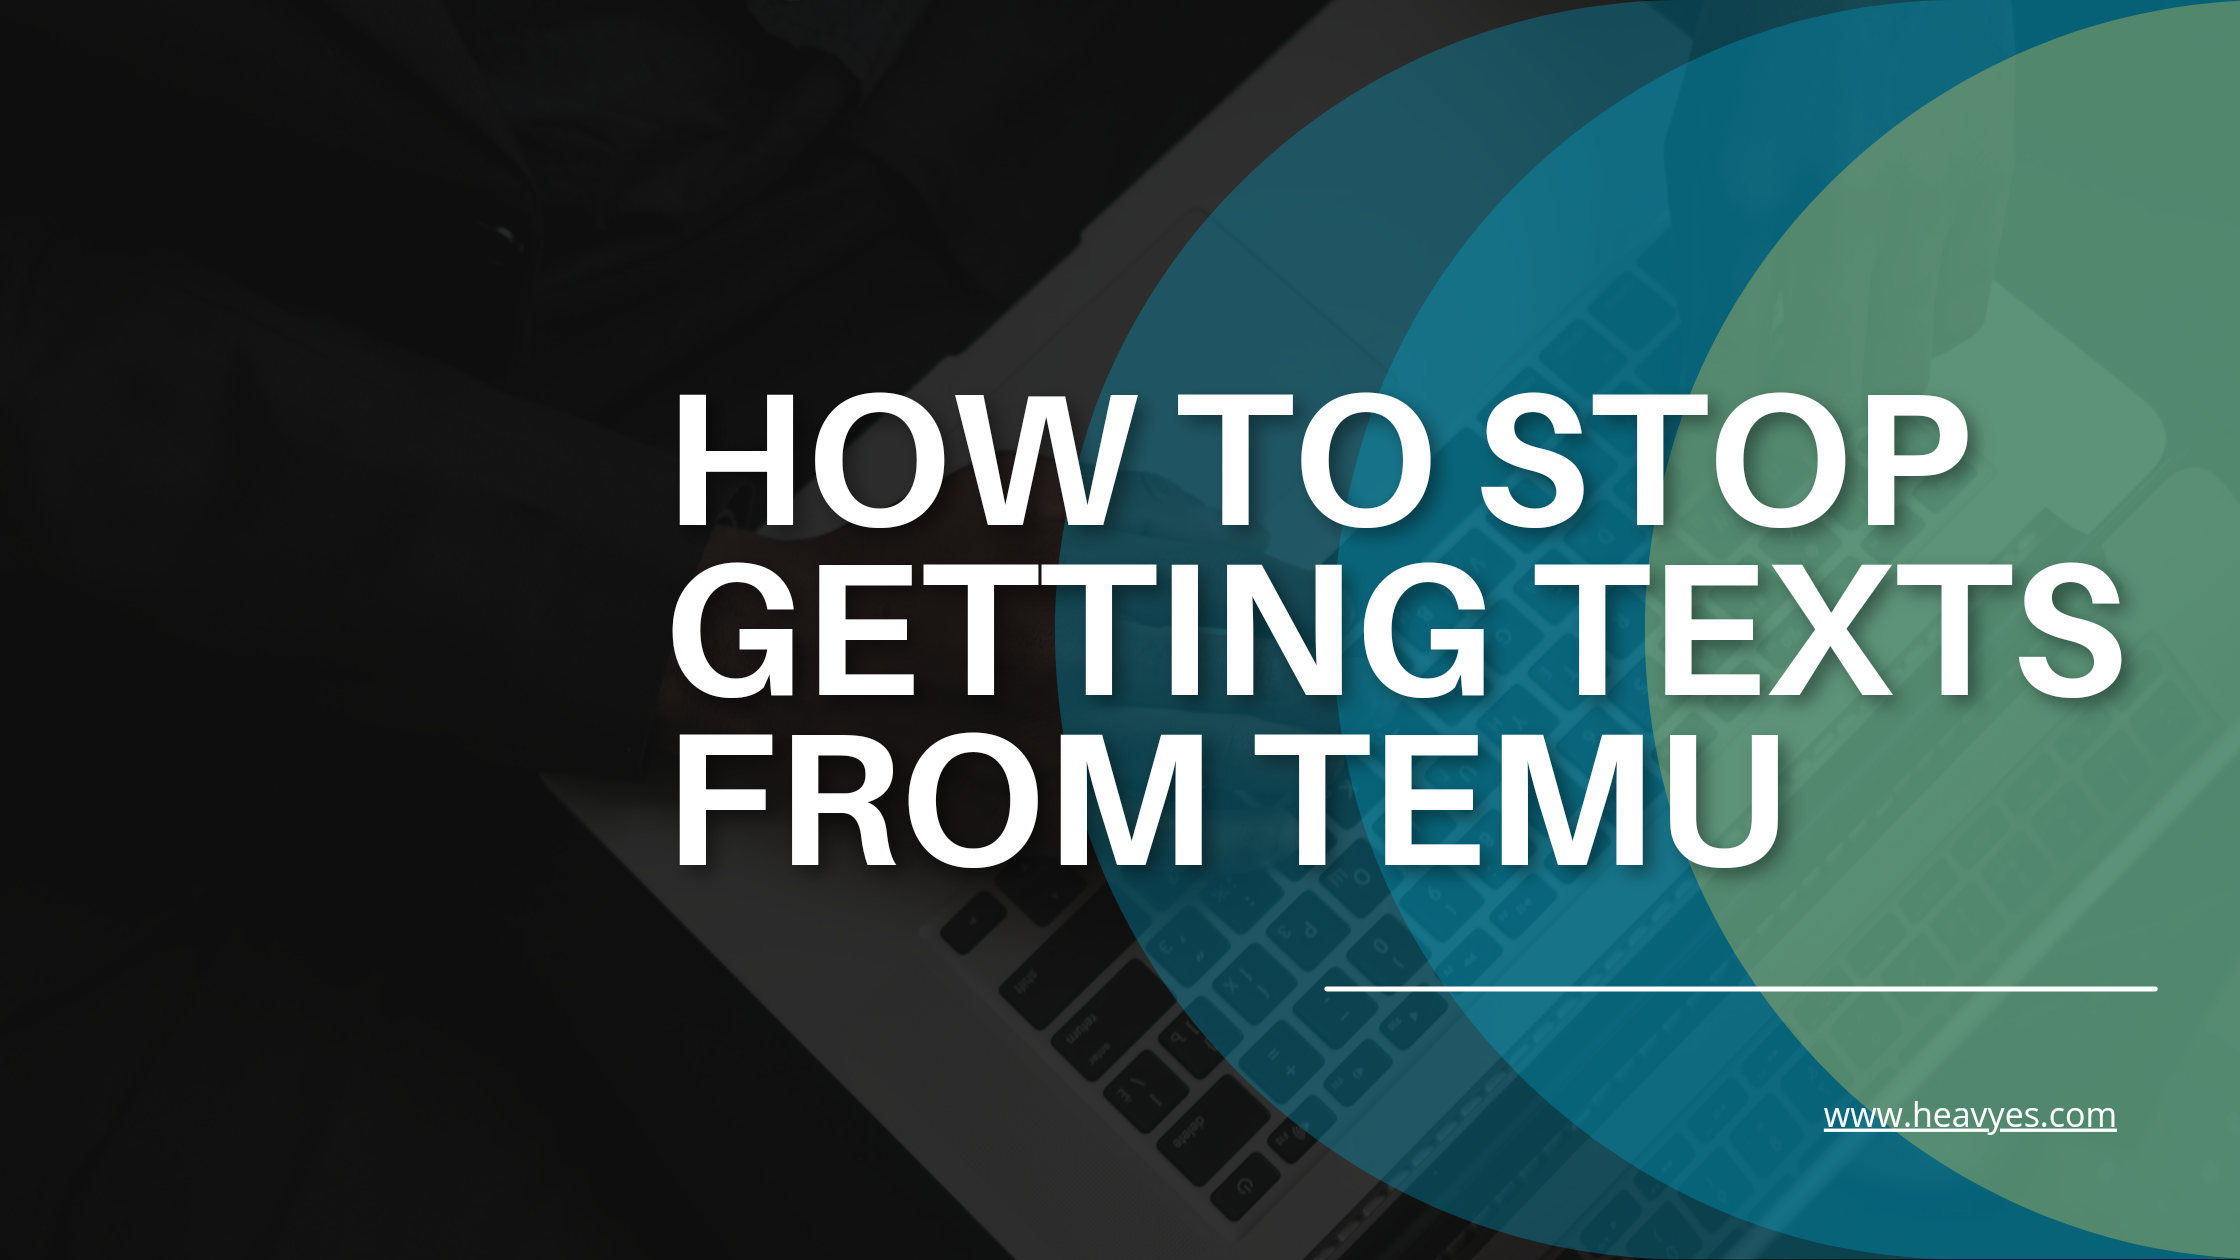 How To Stop Getting Texts From Temu? 3 Steps